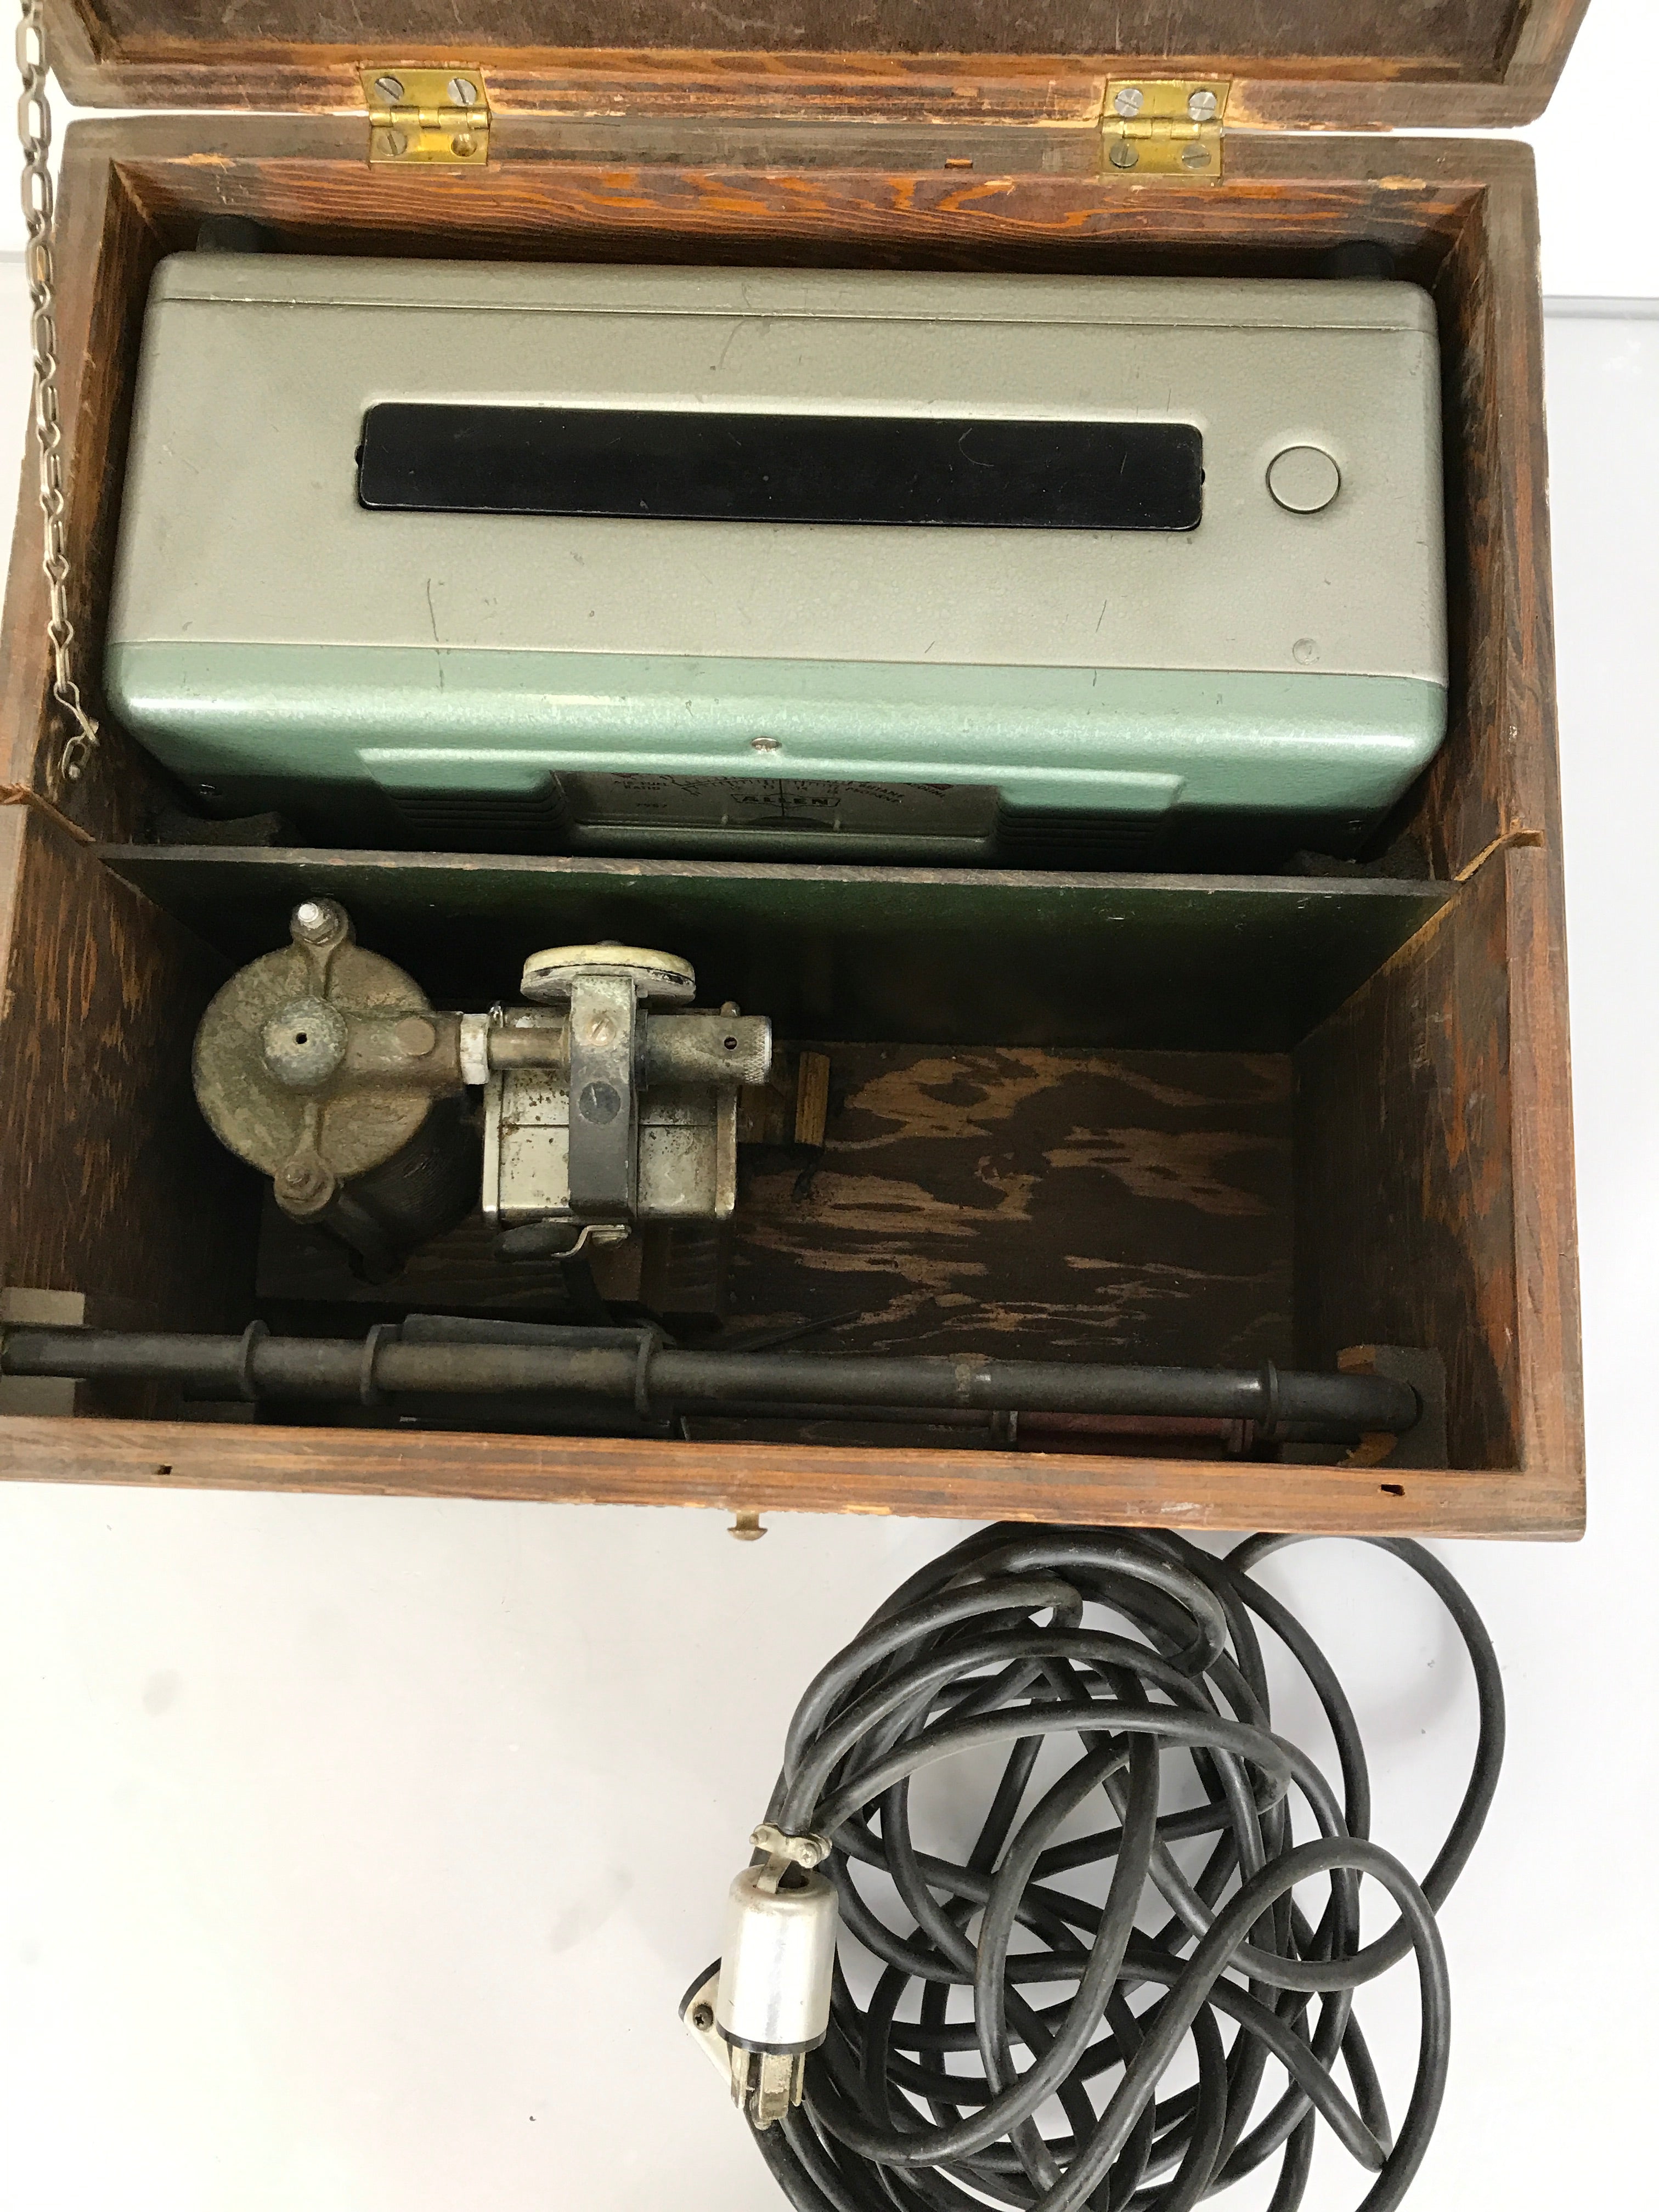 Vintage Allen Model E-1206 Combustion Analyzer *For Parts or Repair*